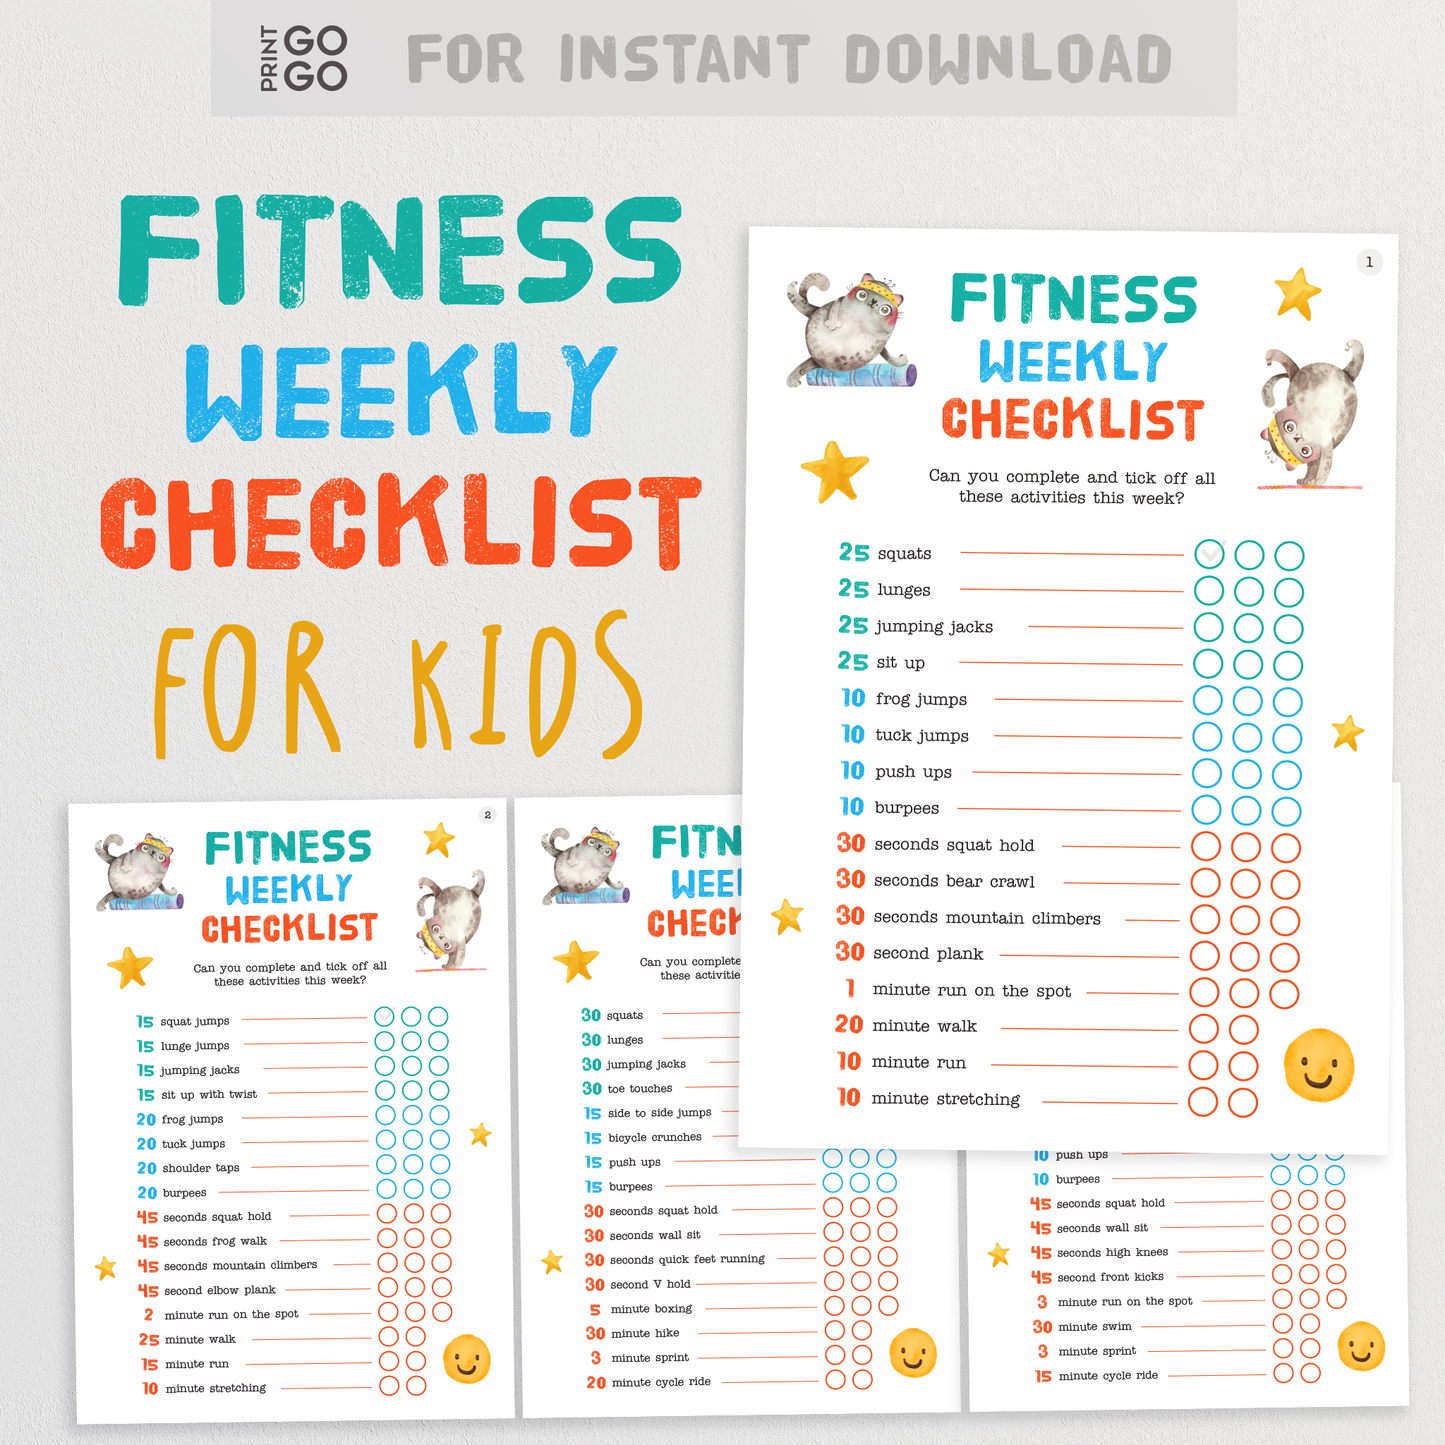 Fitness Activity Checklist - Weekly Exercises To Get Kids Moving